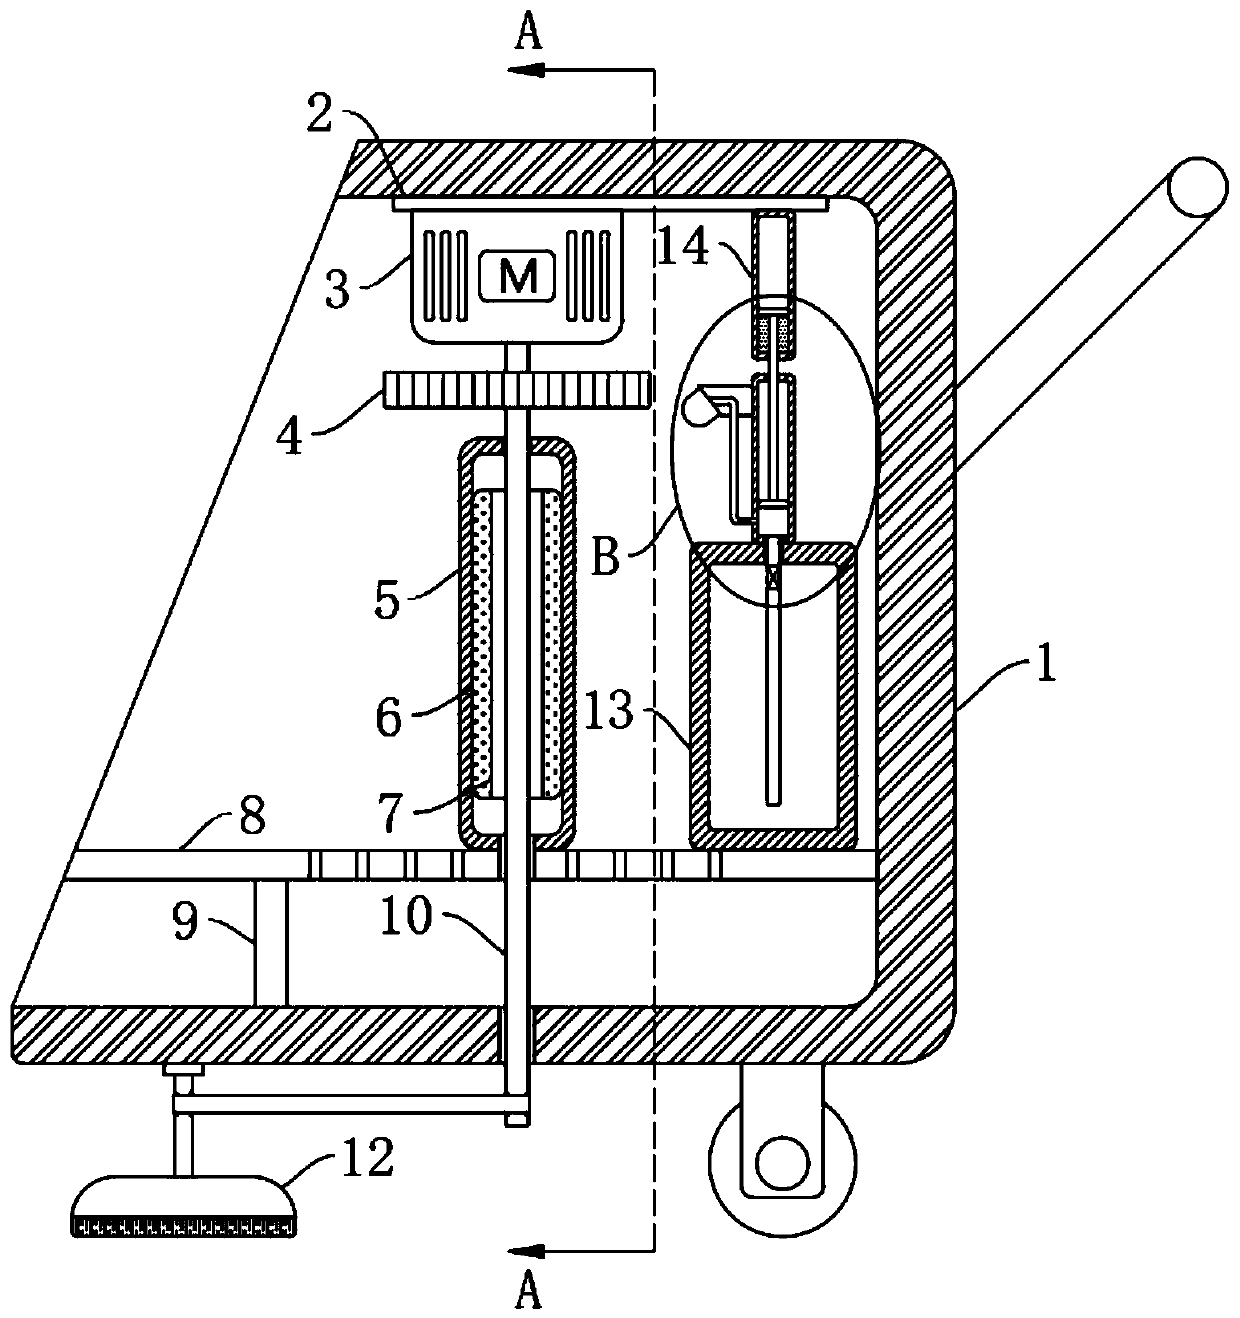 Electrostatic induction-based dust collection and reduction device for construction site